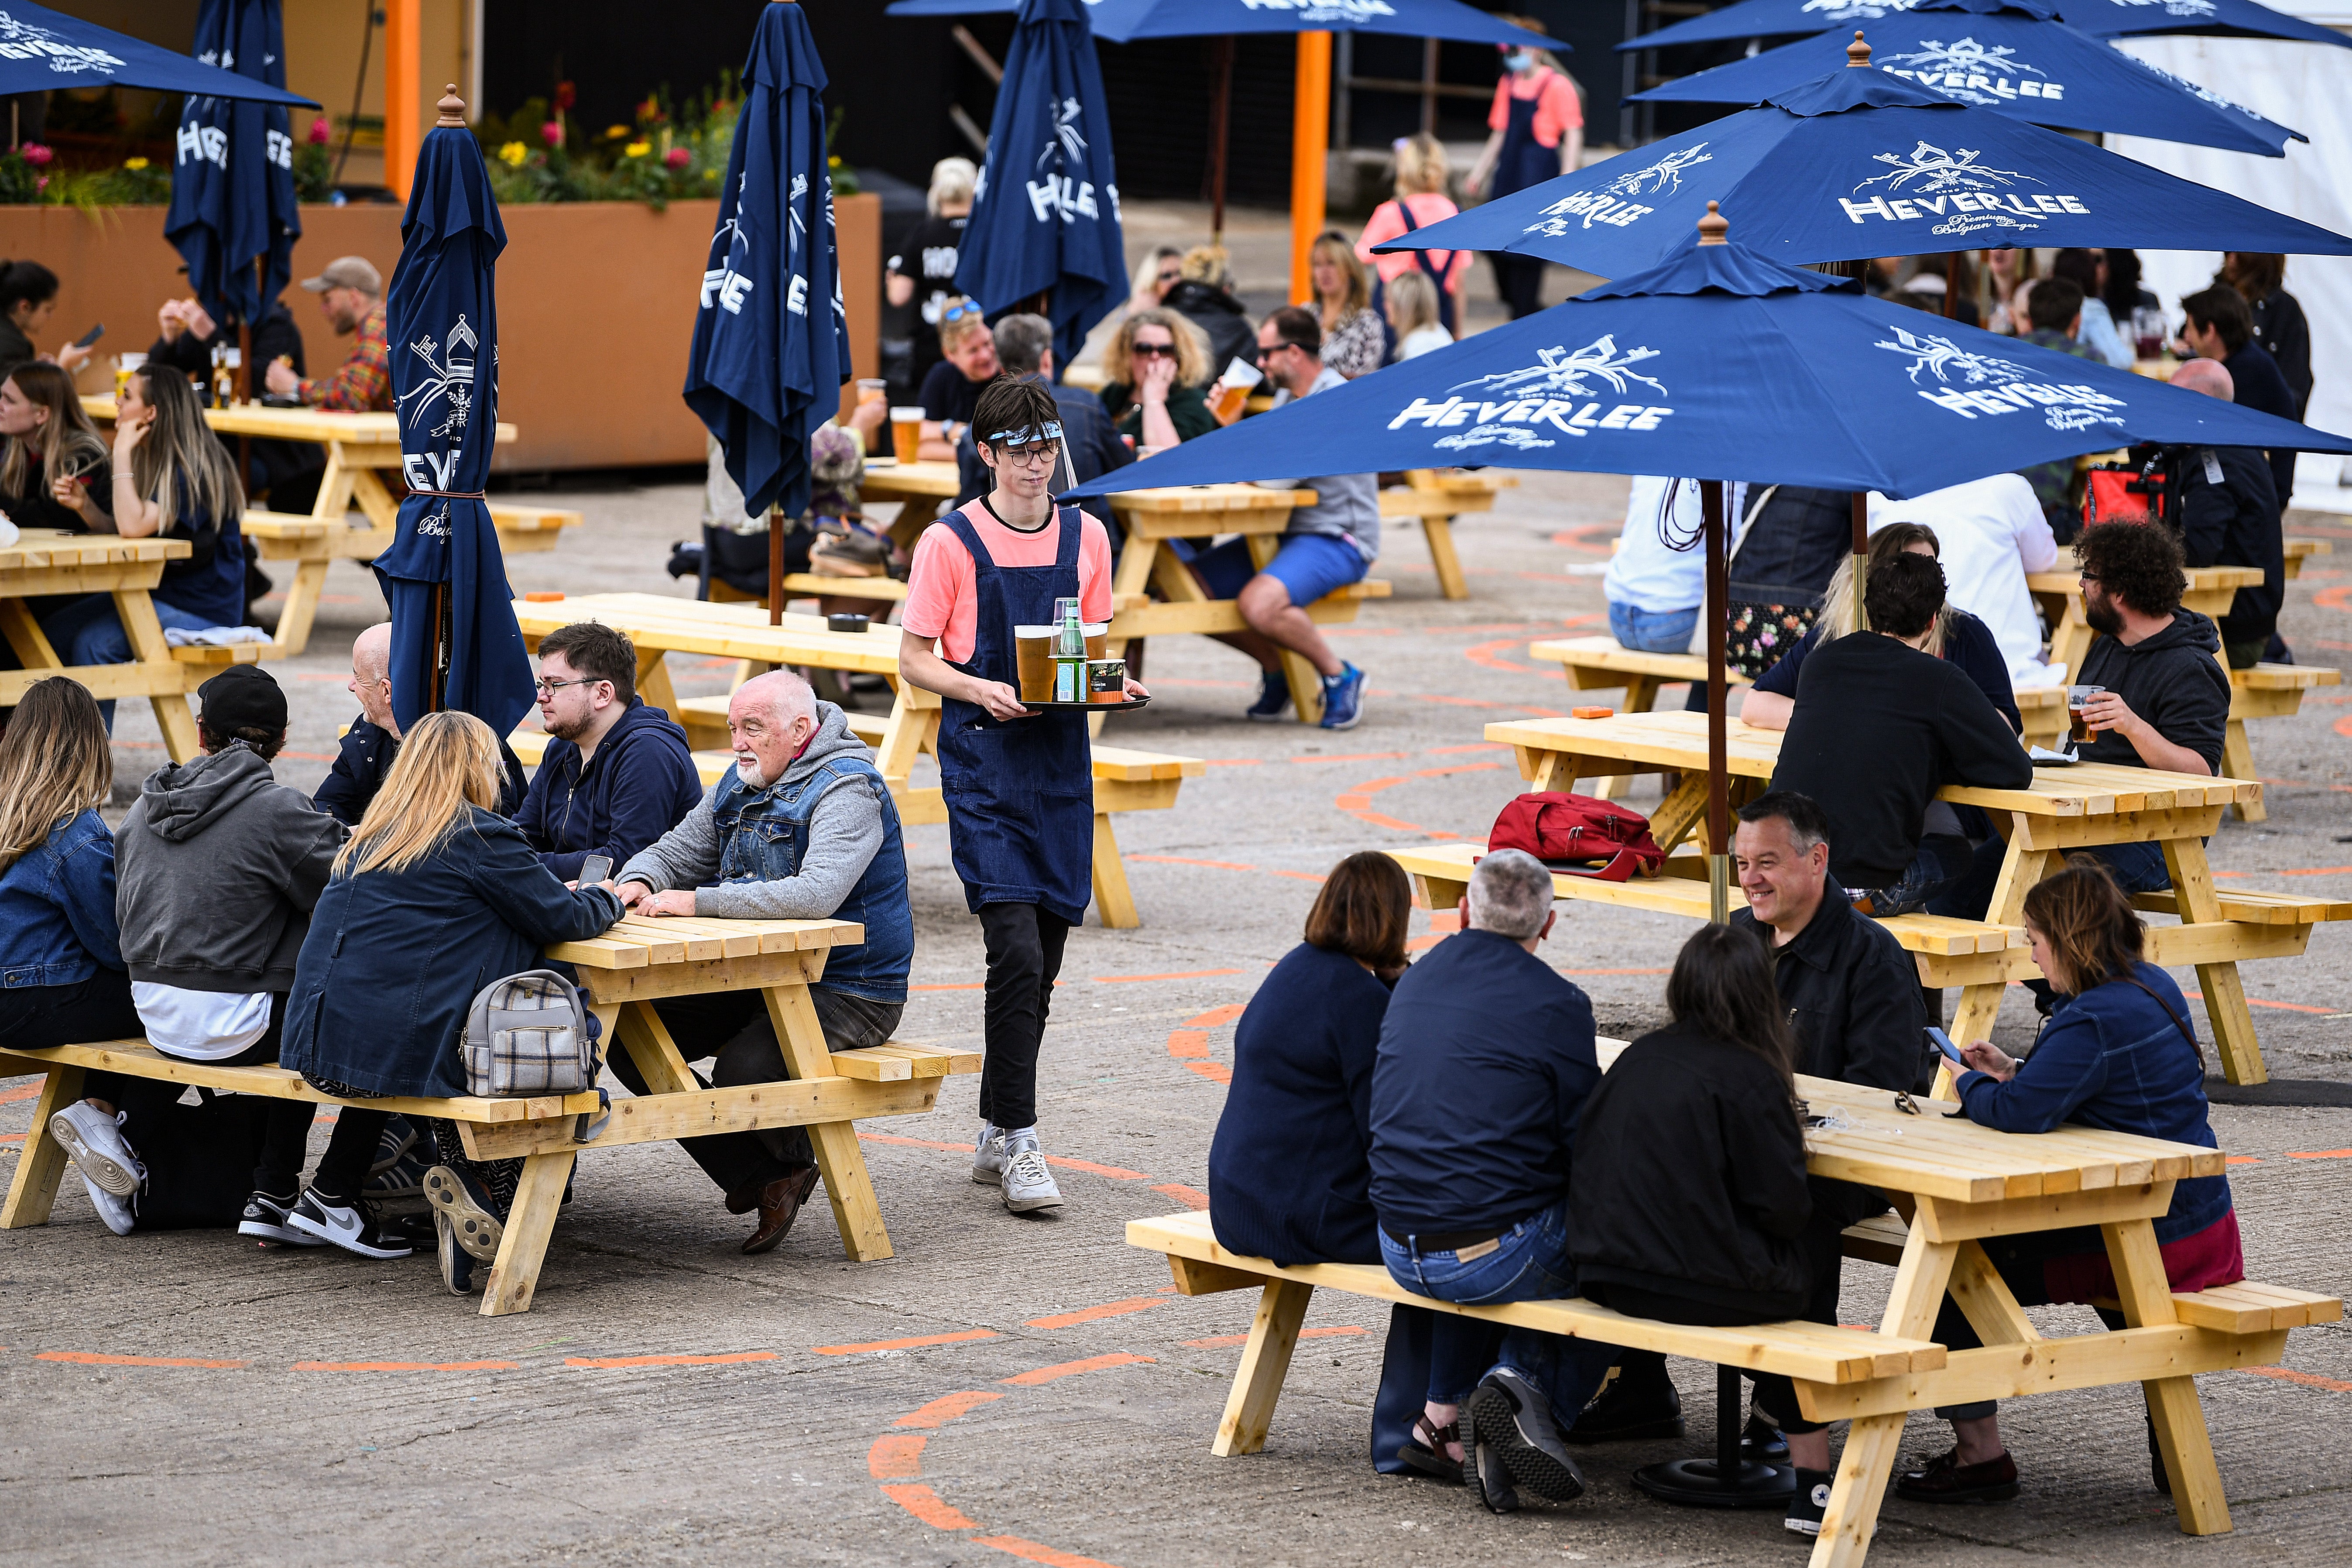 Members of the public enjoy their first drink in a beer garden at SWG3 on 6 July, 2020 in Glasgow, Scotland. Now, residents will be able to return to pubs and other venues amid an easing of Covid-19 restrictions.